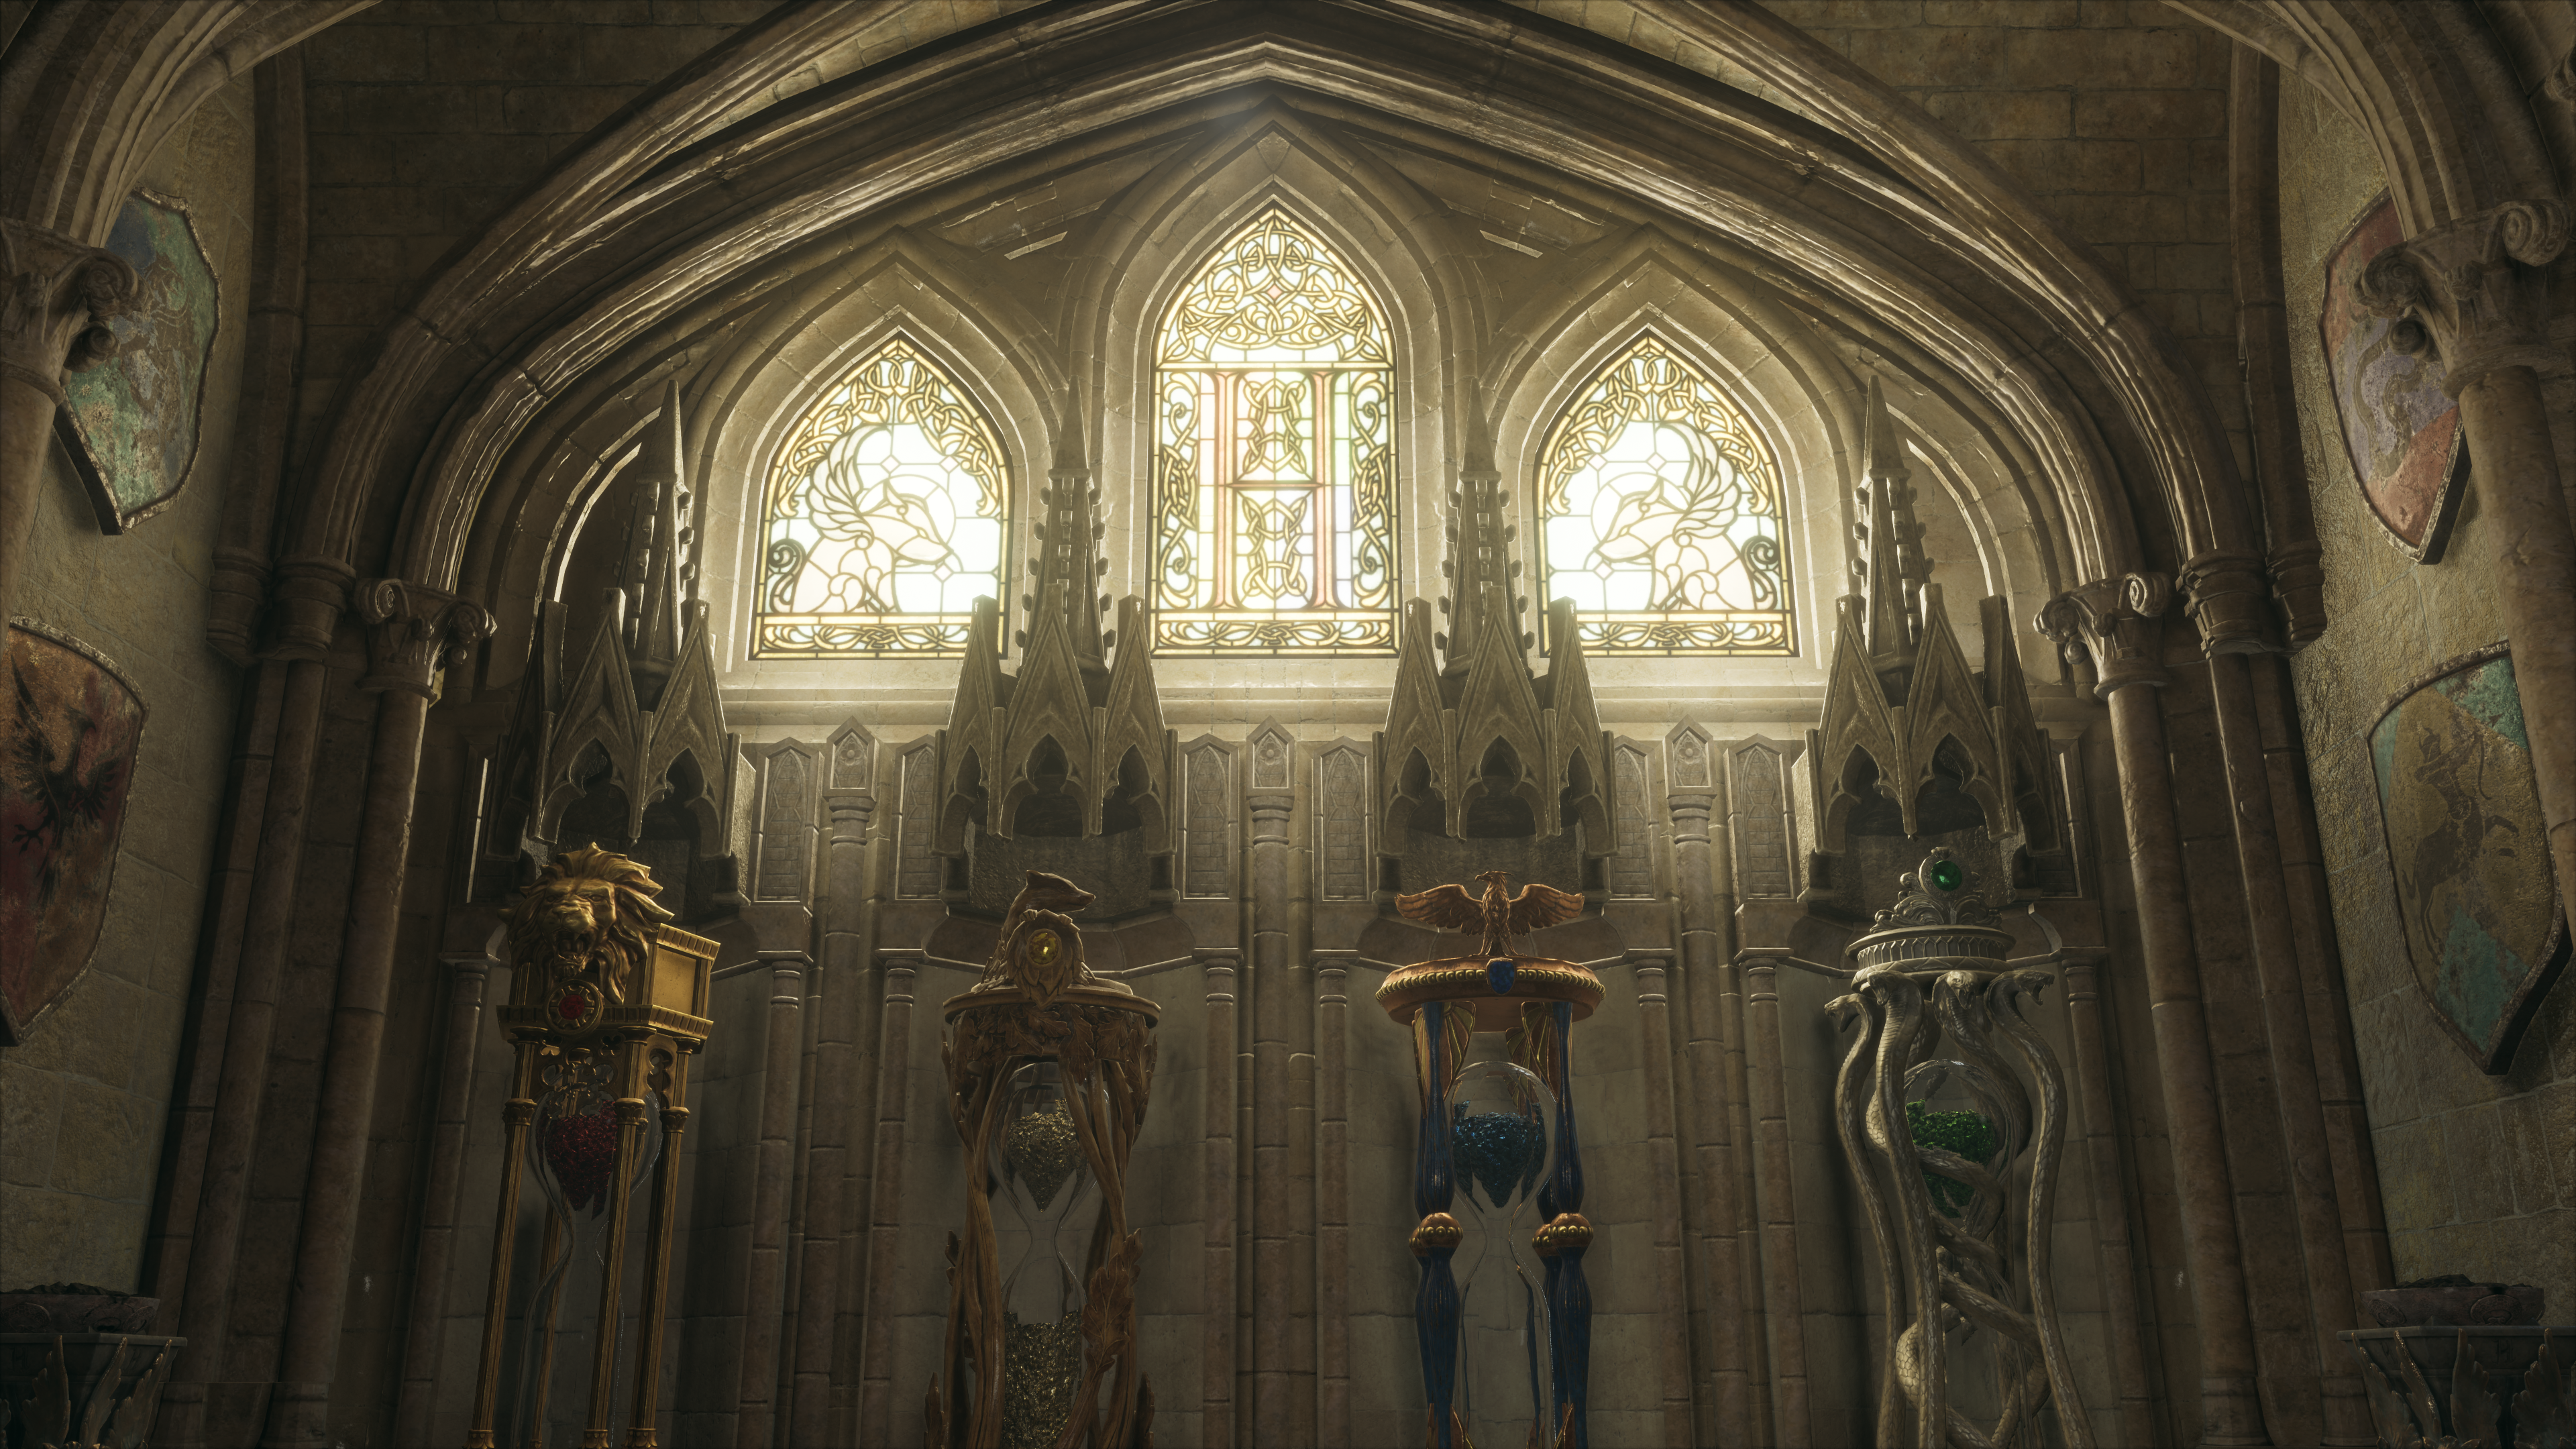 Nvidia RTX Hogwarts Legacy Video Games CGi Video Game Art Interior Architecture Window Stained Glass 3840x2160